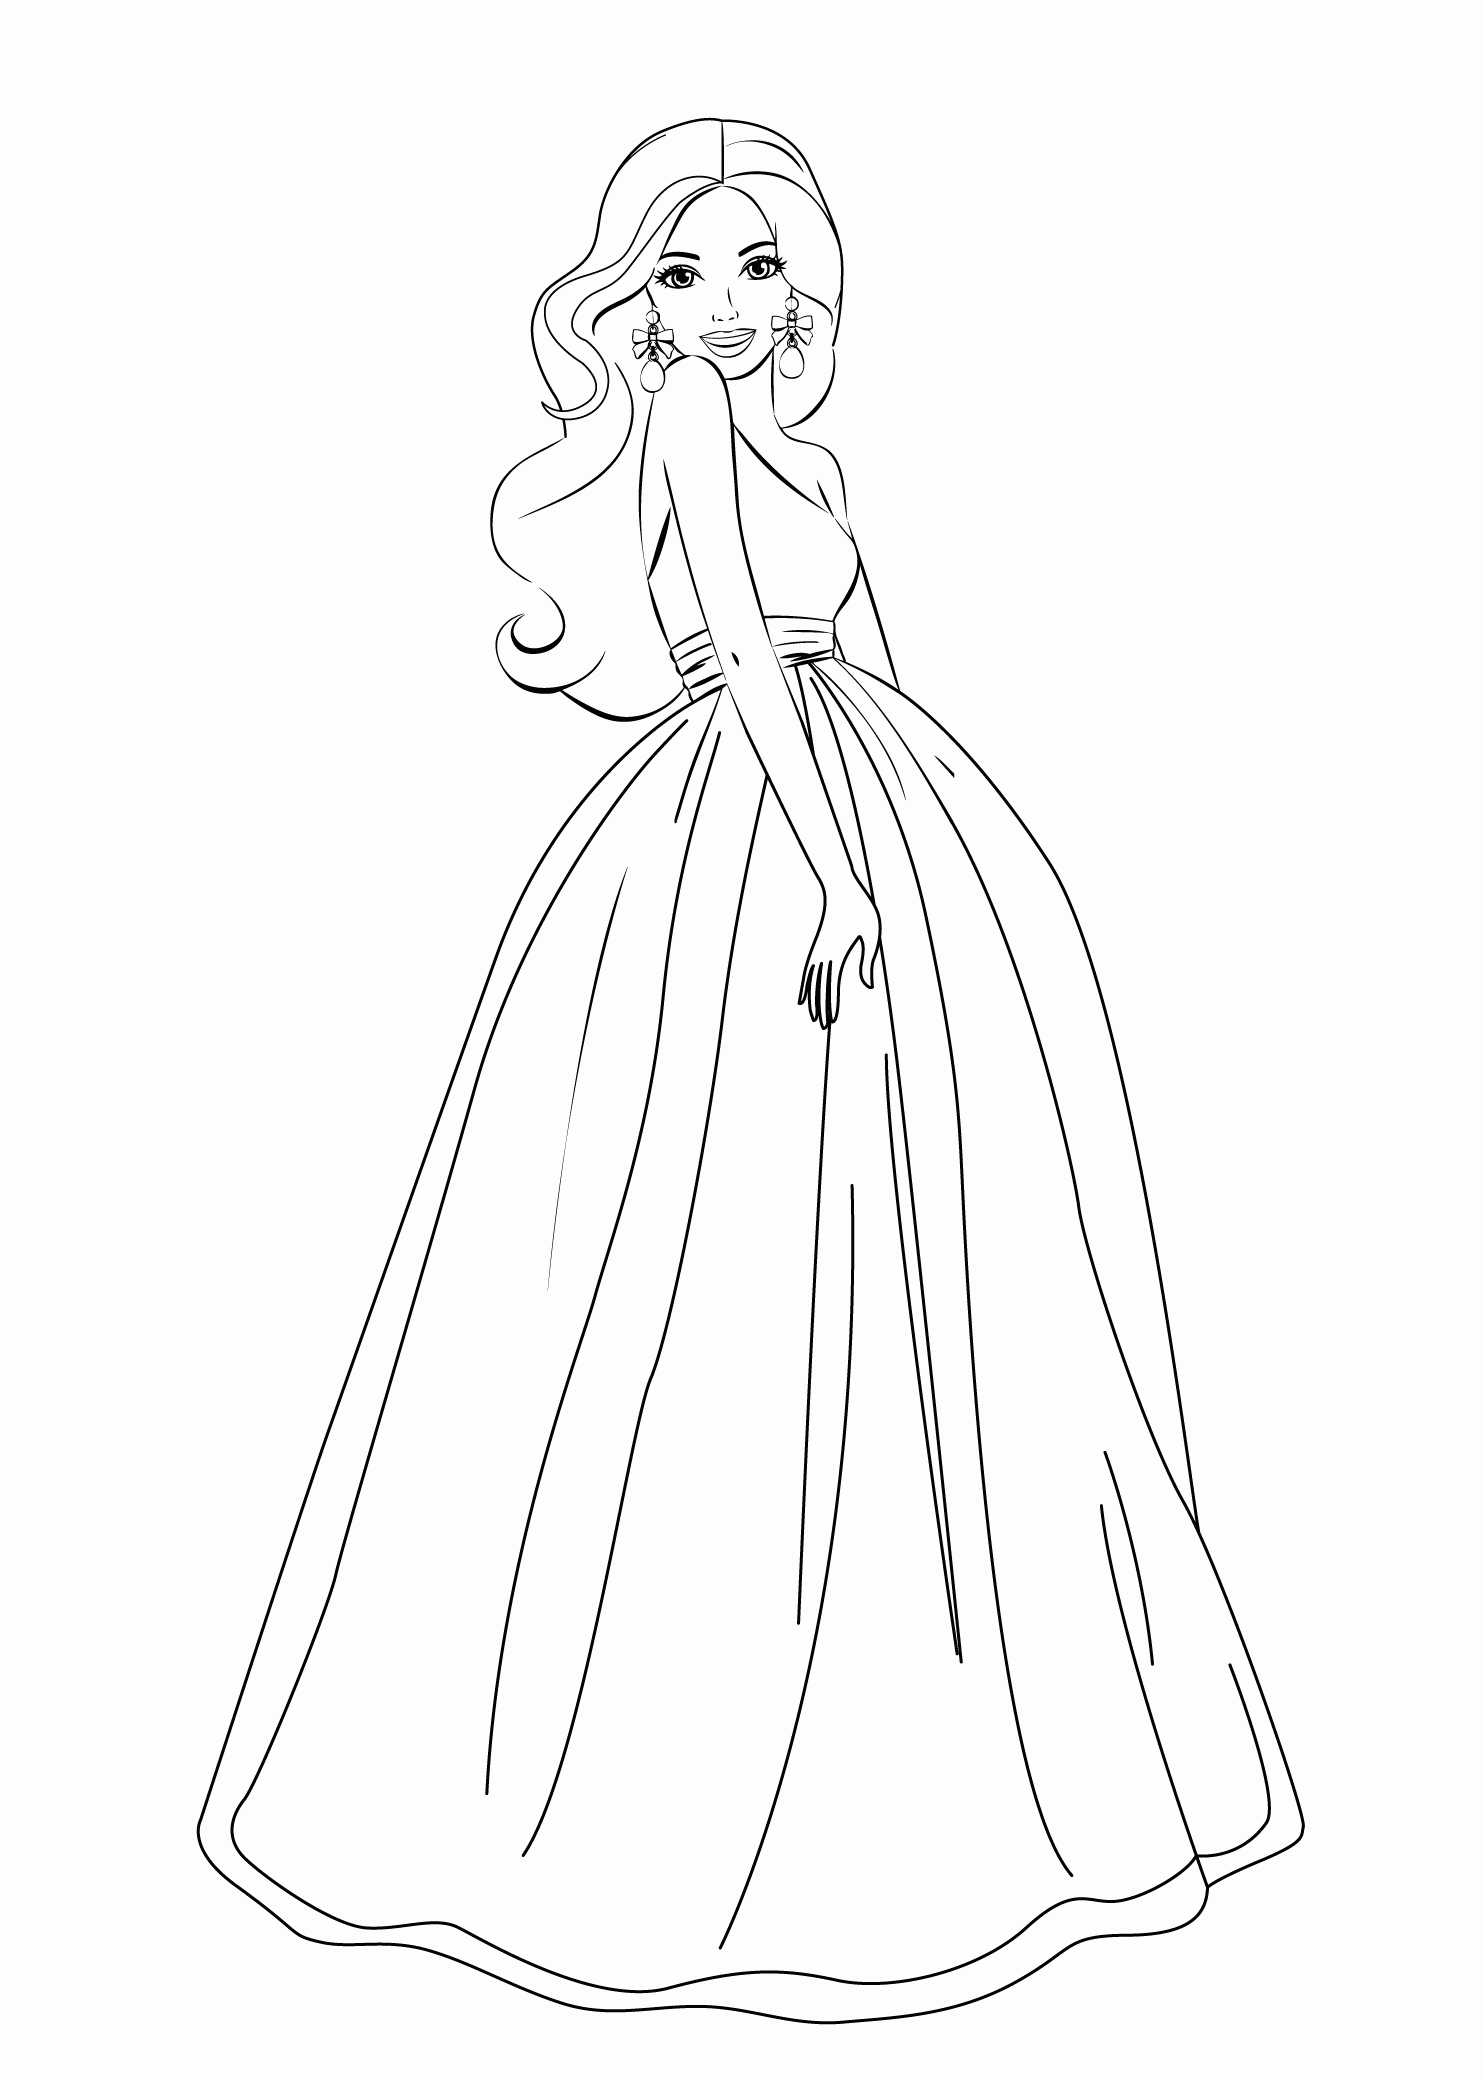 barbie coloring book free download 20 barbie coloring pages doc pdf png jpeg eps barbie free download book coloring 